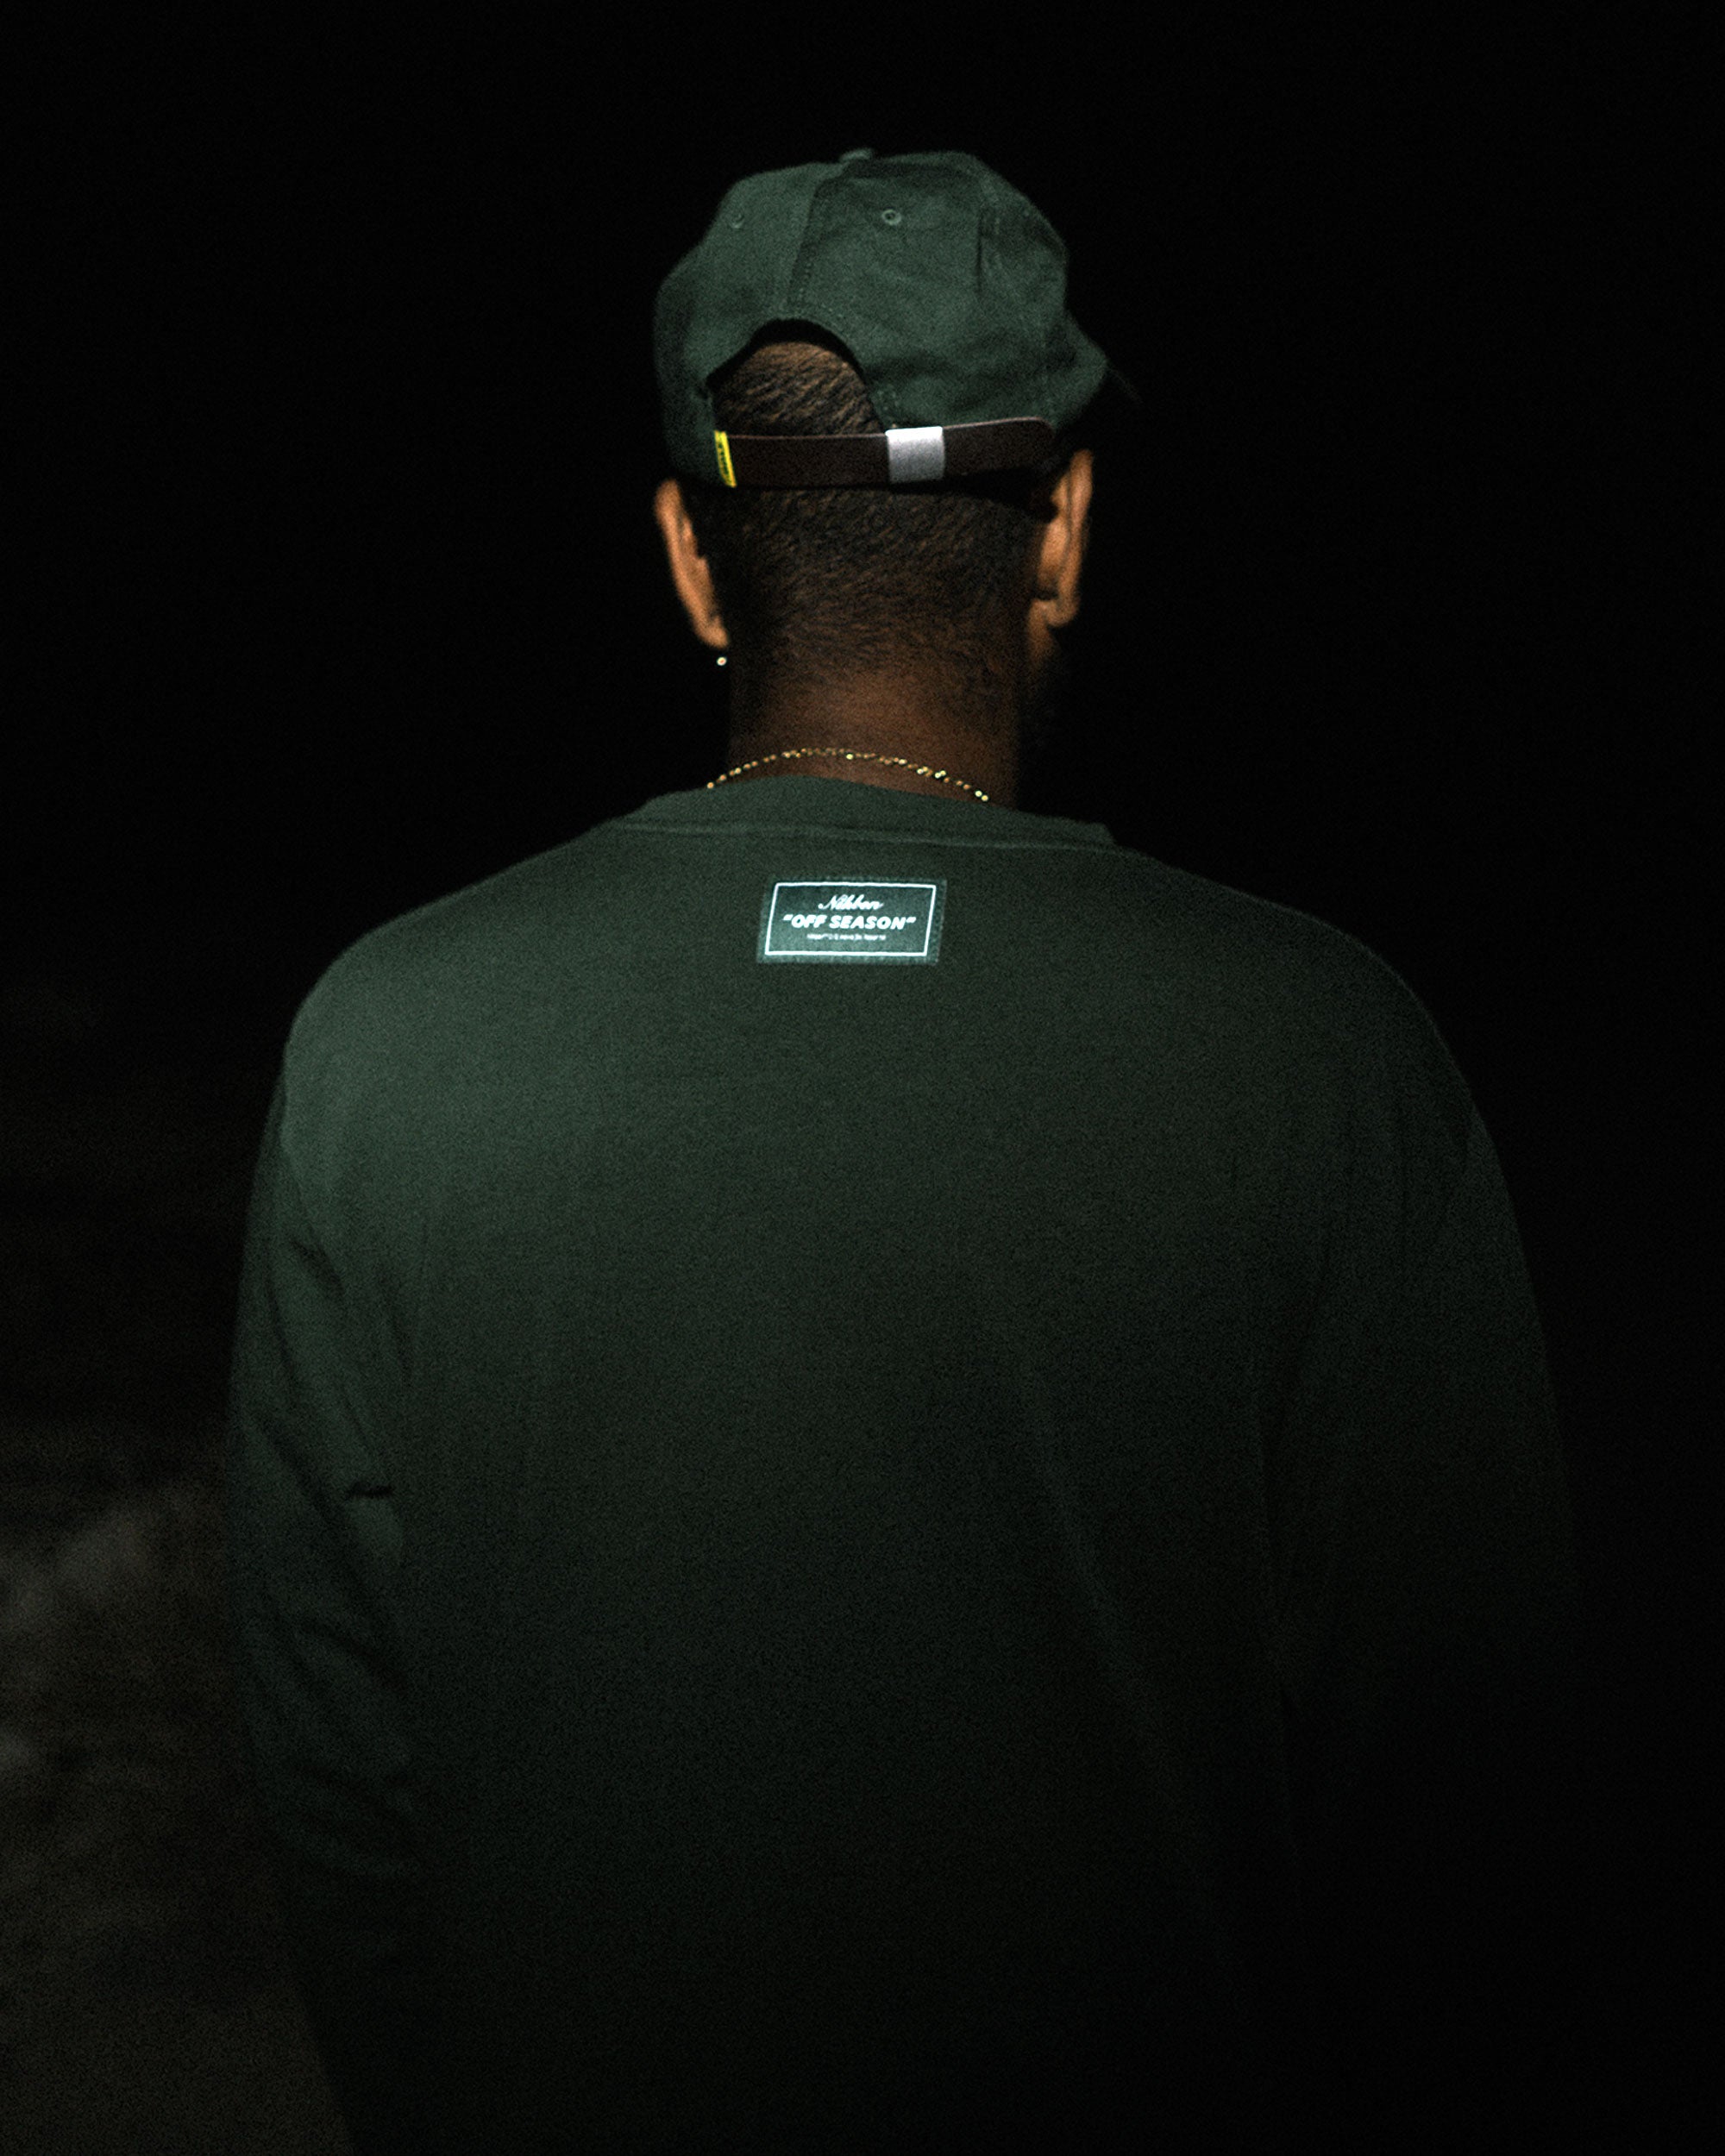 Back view of male model wearing a green long-sleeved t-shirt with a patch in the neck.